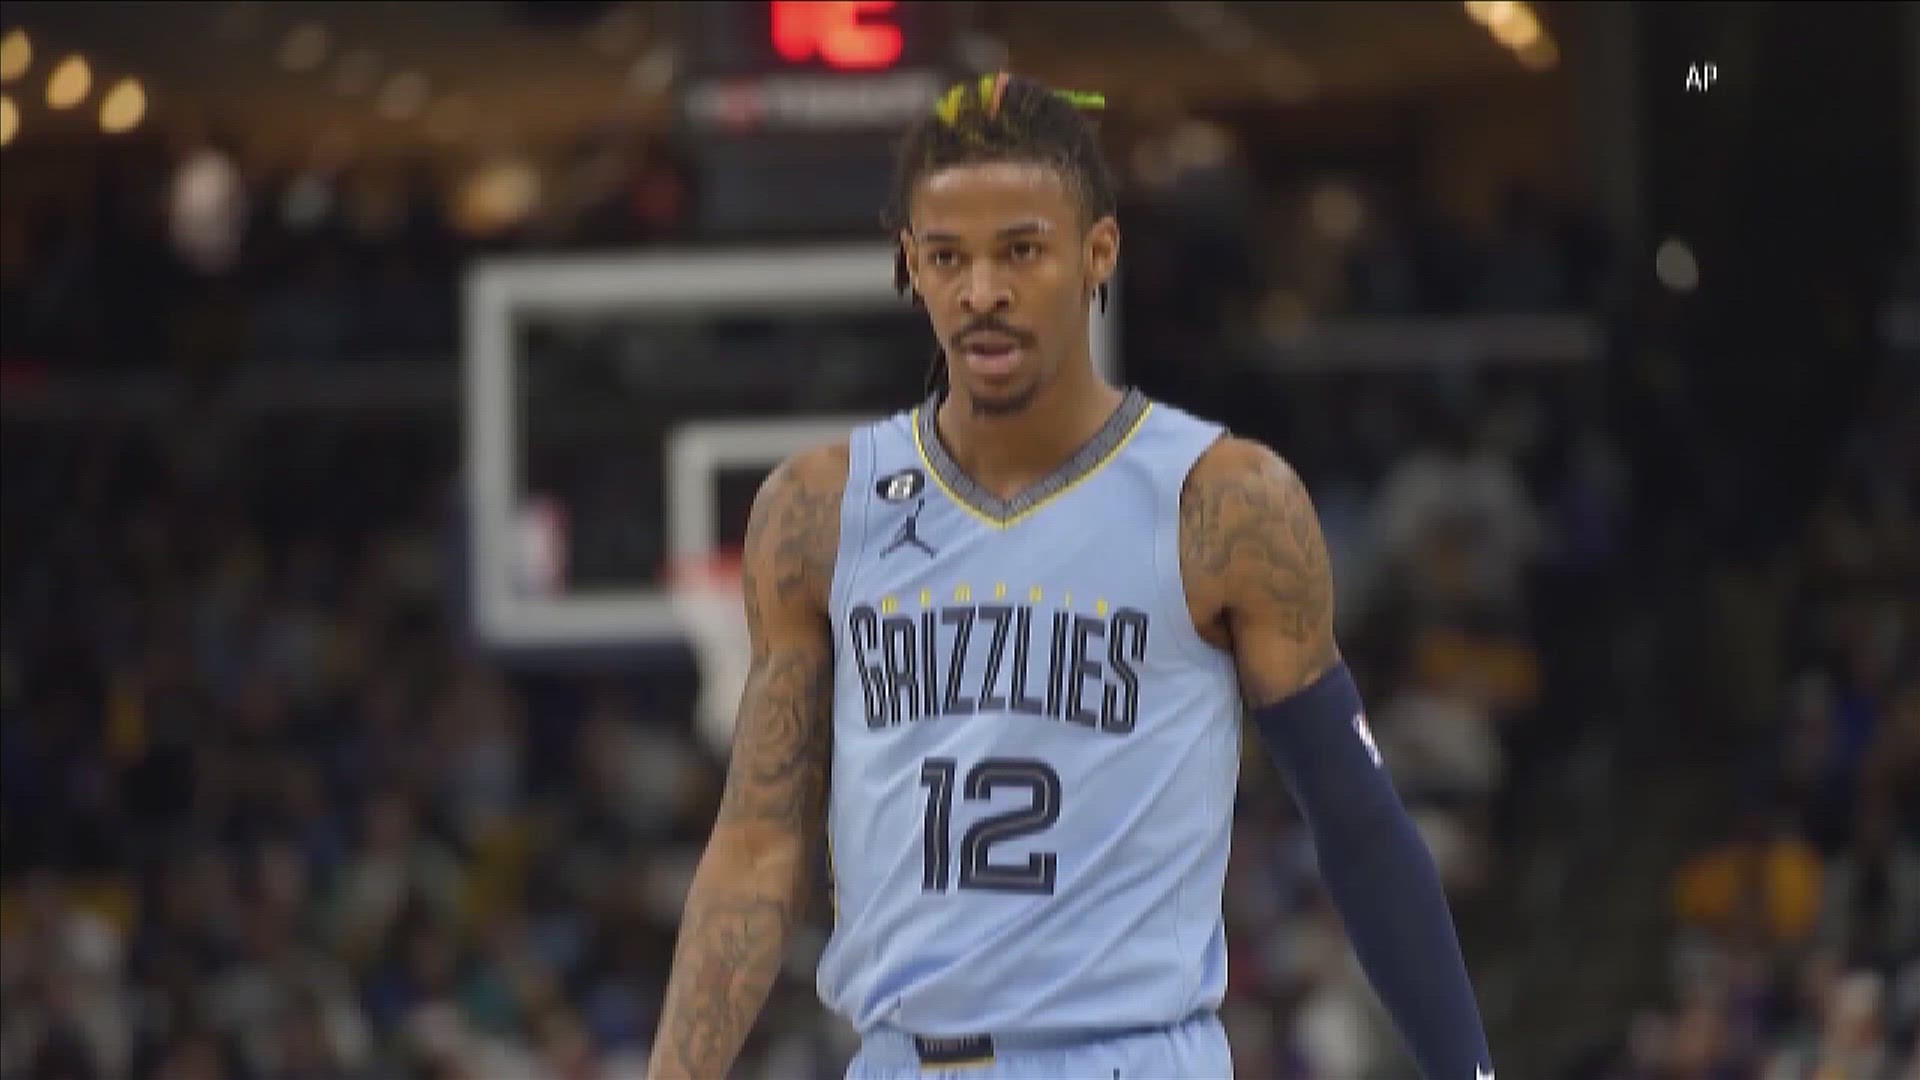 The decision comes after a league investigation into the Grizzlies superstar, who displayed a gun on Instagram Live for the second time.